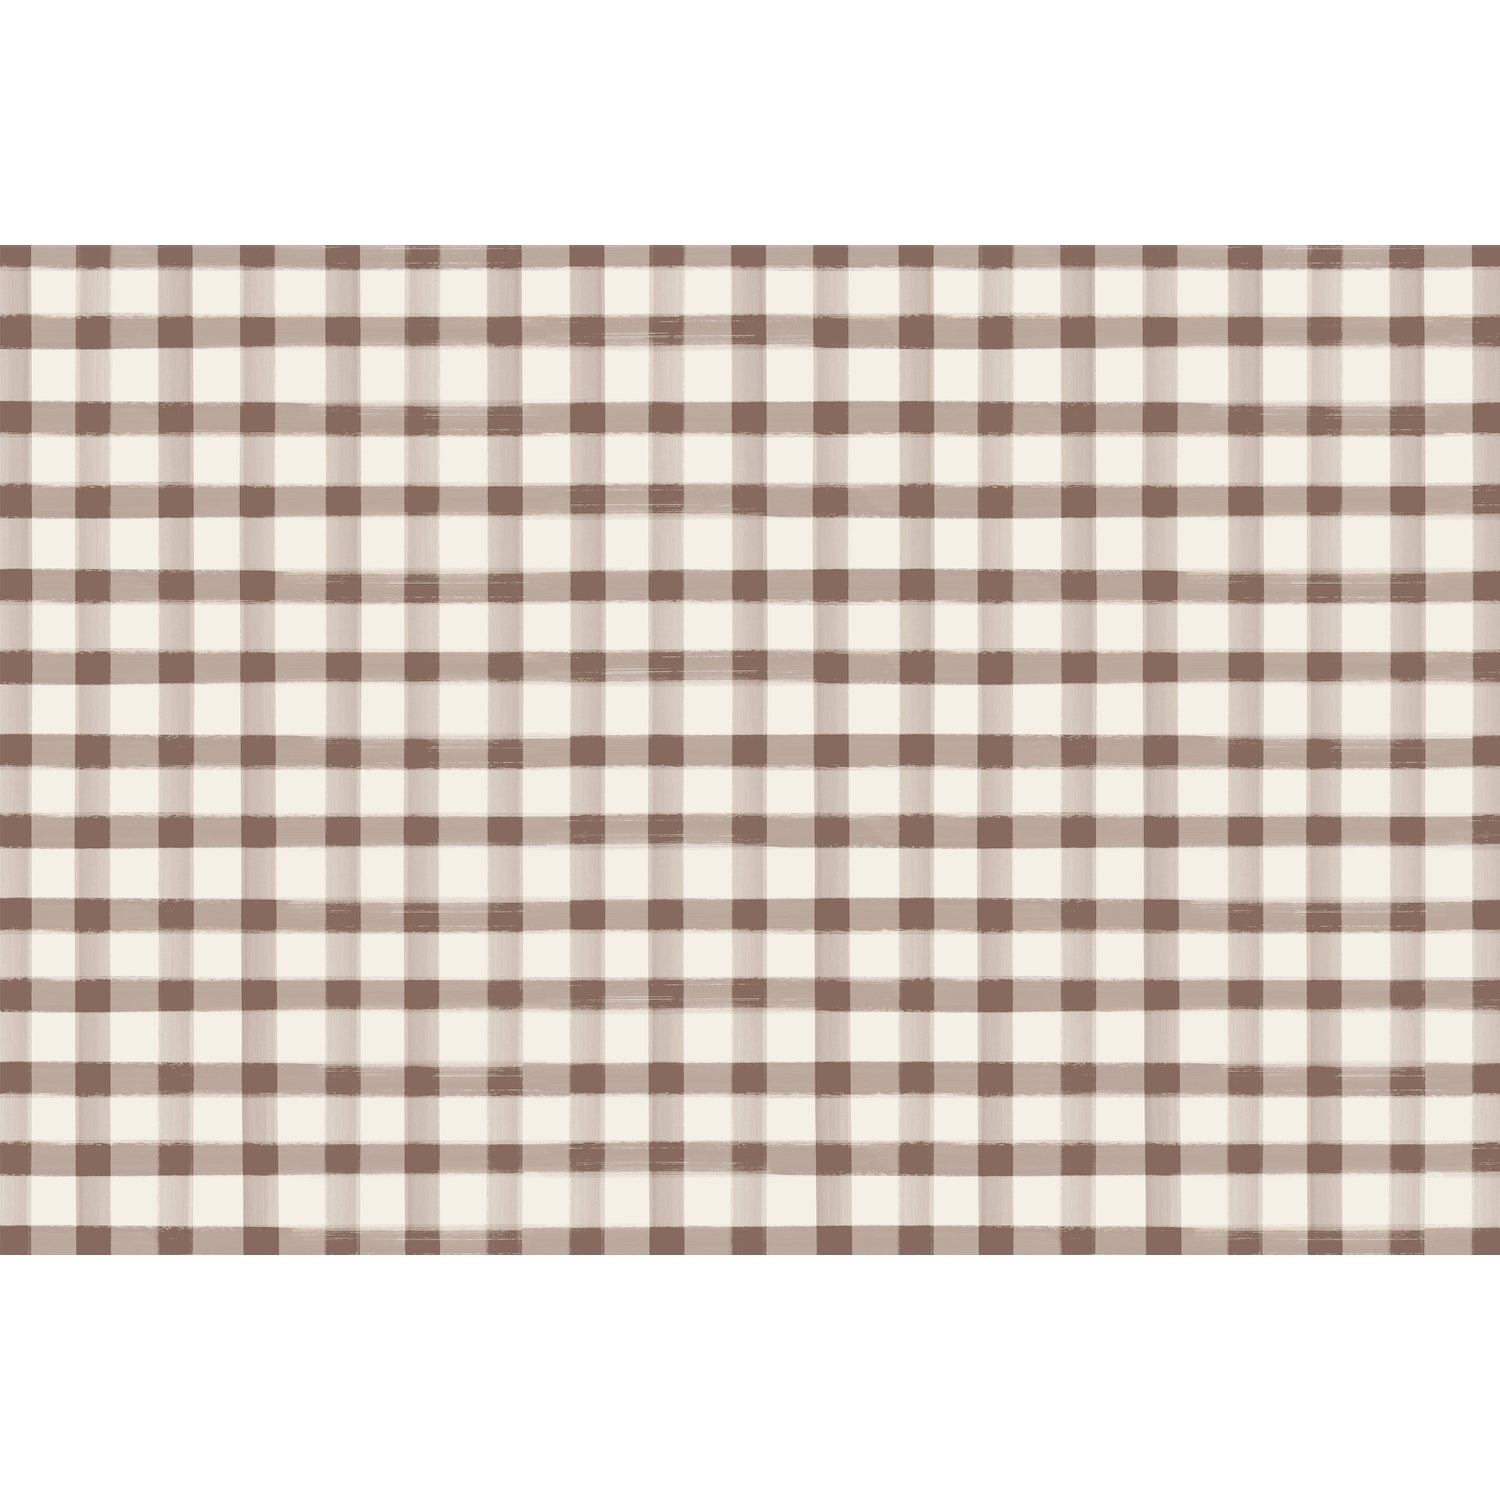 A painted gingham grid check pattern made of muted brown lines intersecting at medium brown squares, on a white background.